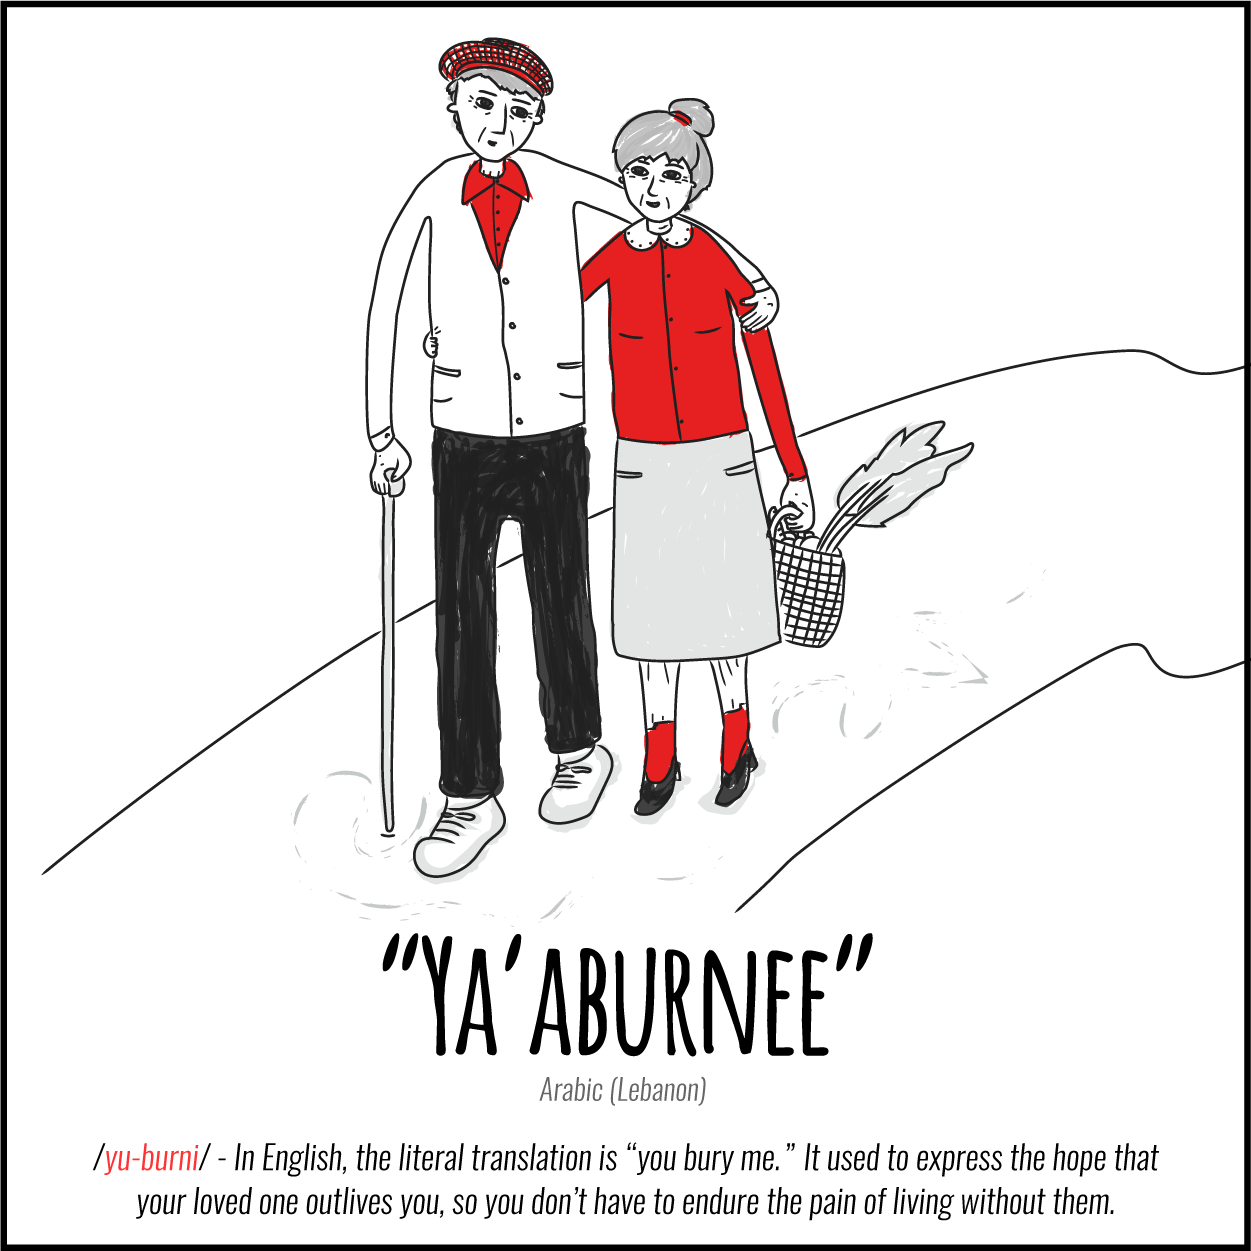 Illustration: Untranslatable Words about love, Ya'aburnee (Arabic, Lebanon) In English, the literal translation is "you bury me." Its used to express the hope that your loved one outlives you, so you don't have to endure the pain of living without them.